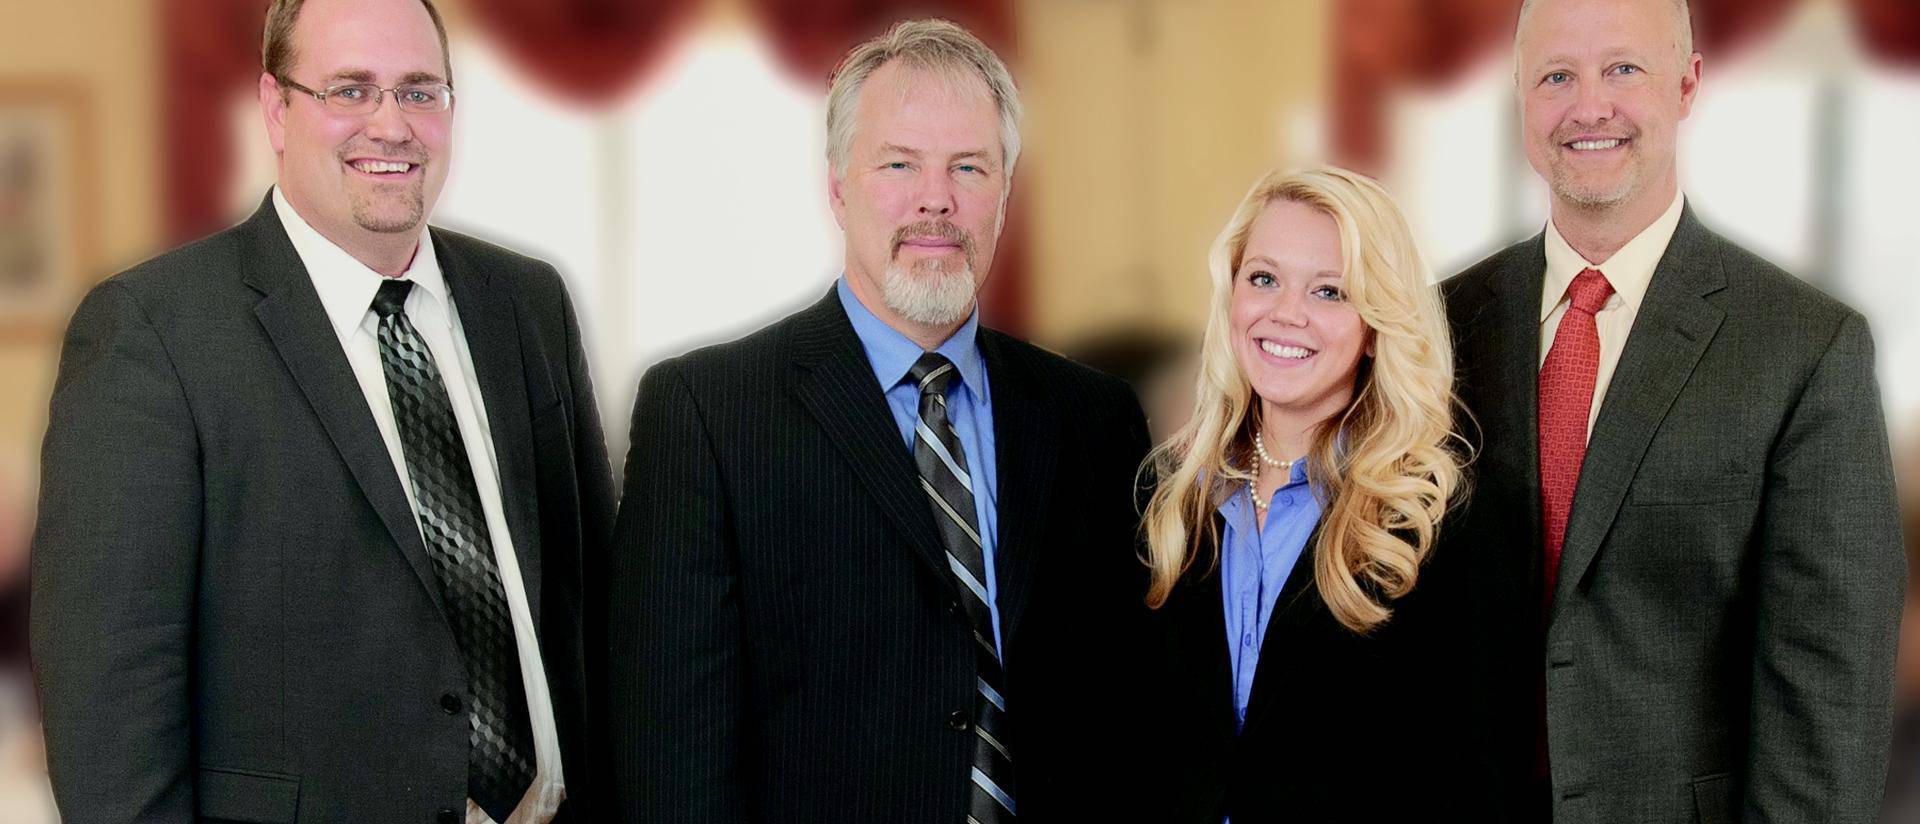 Chris Krebsbach, Doug Olson, Kelsey Callahan and David Mills represent the close connections between UW-Eau Claire’s health care administration program and Golden Living.